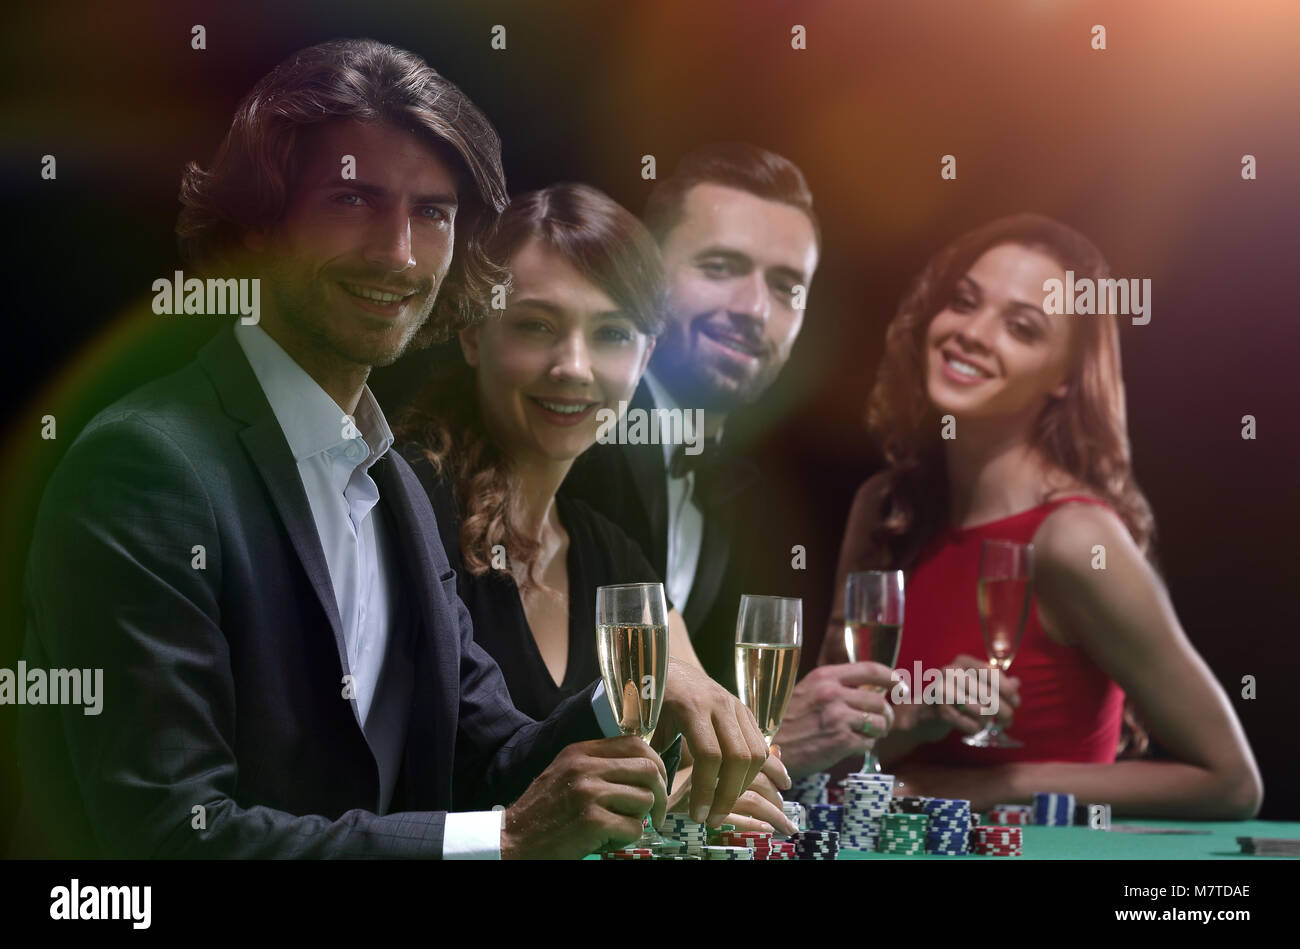 side view of group of people playing poker together in casino Stock Photo